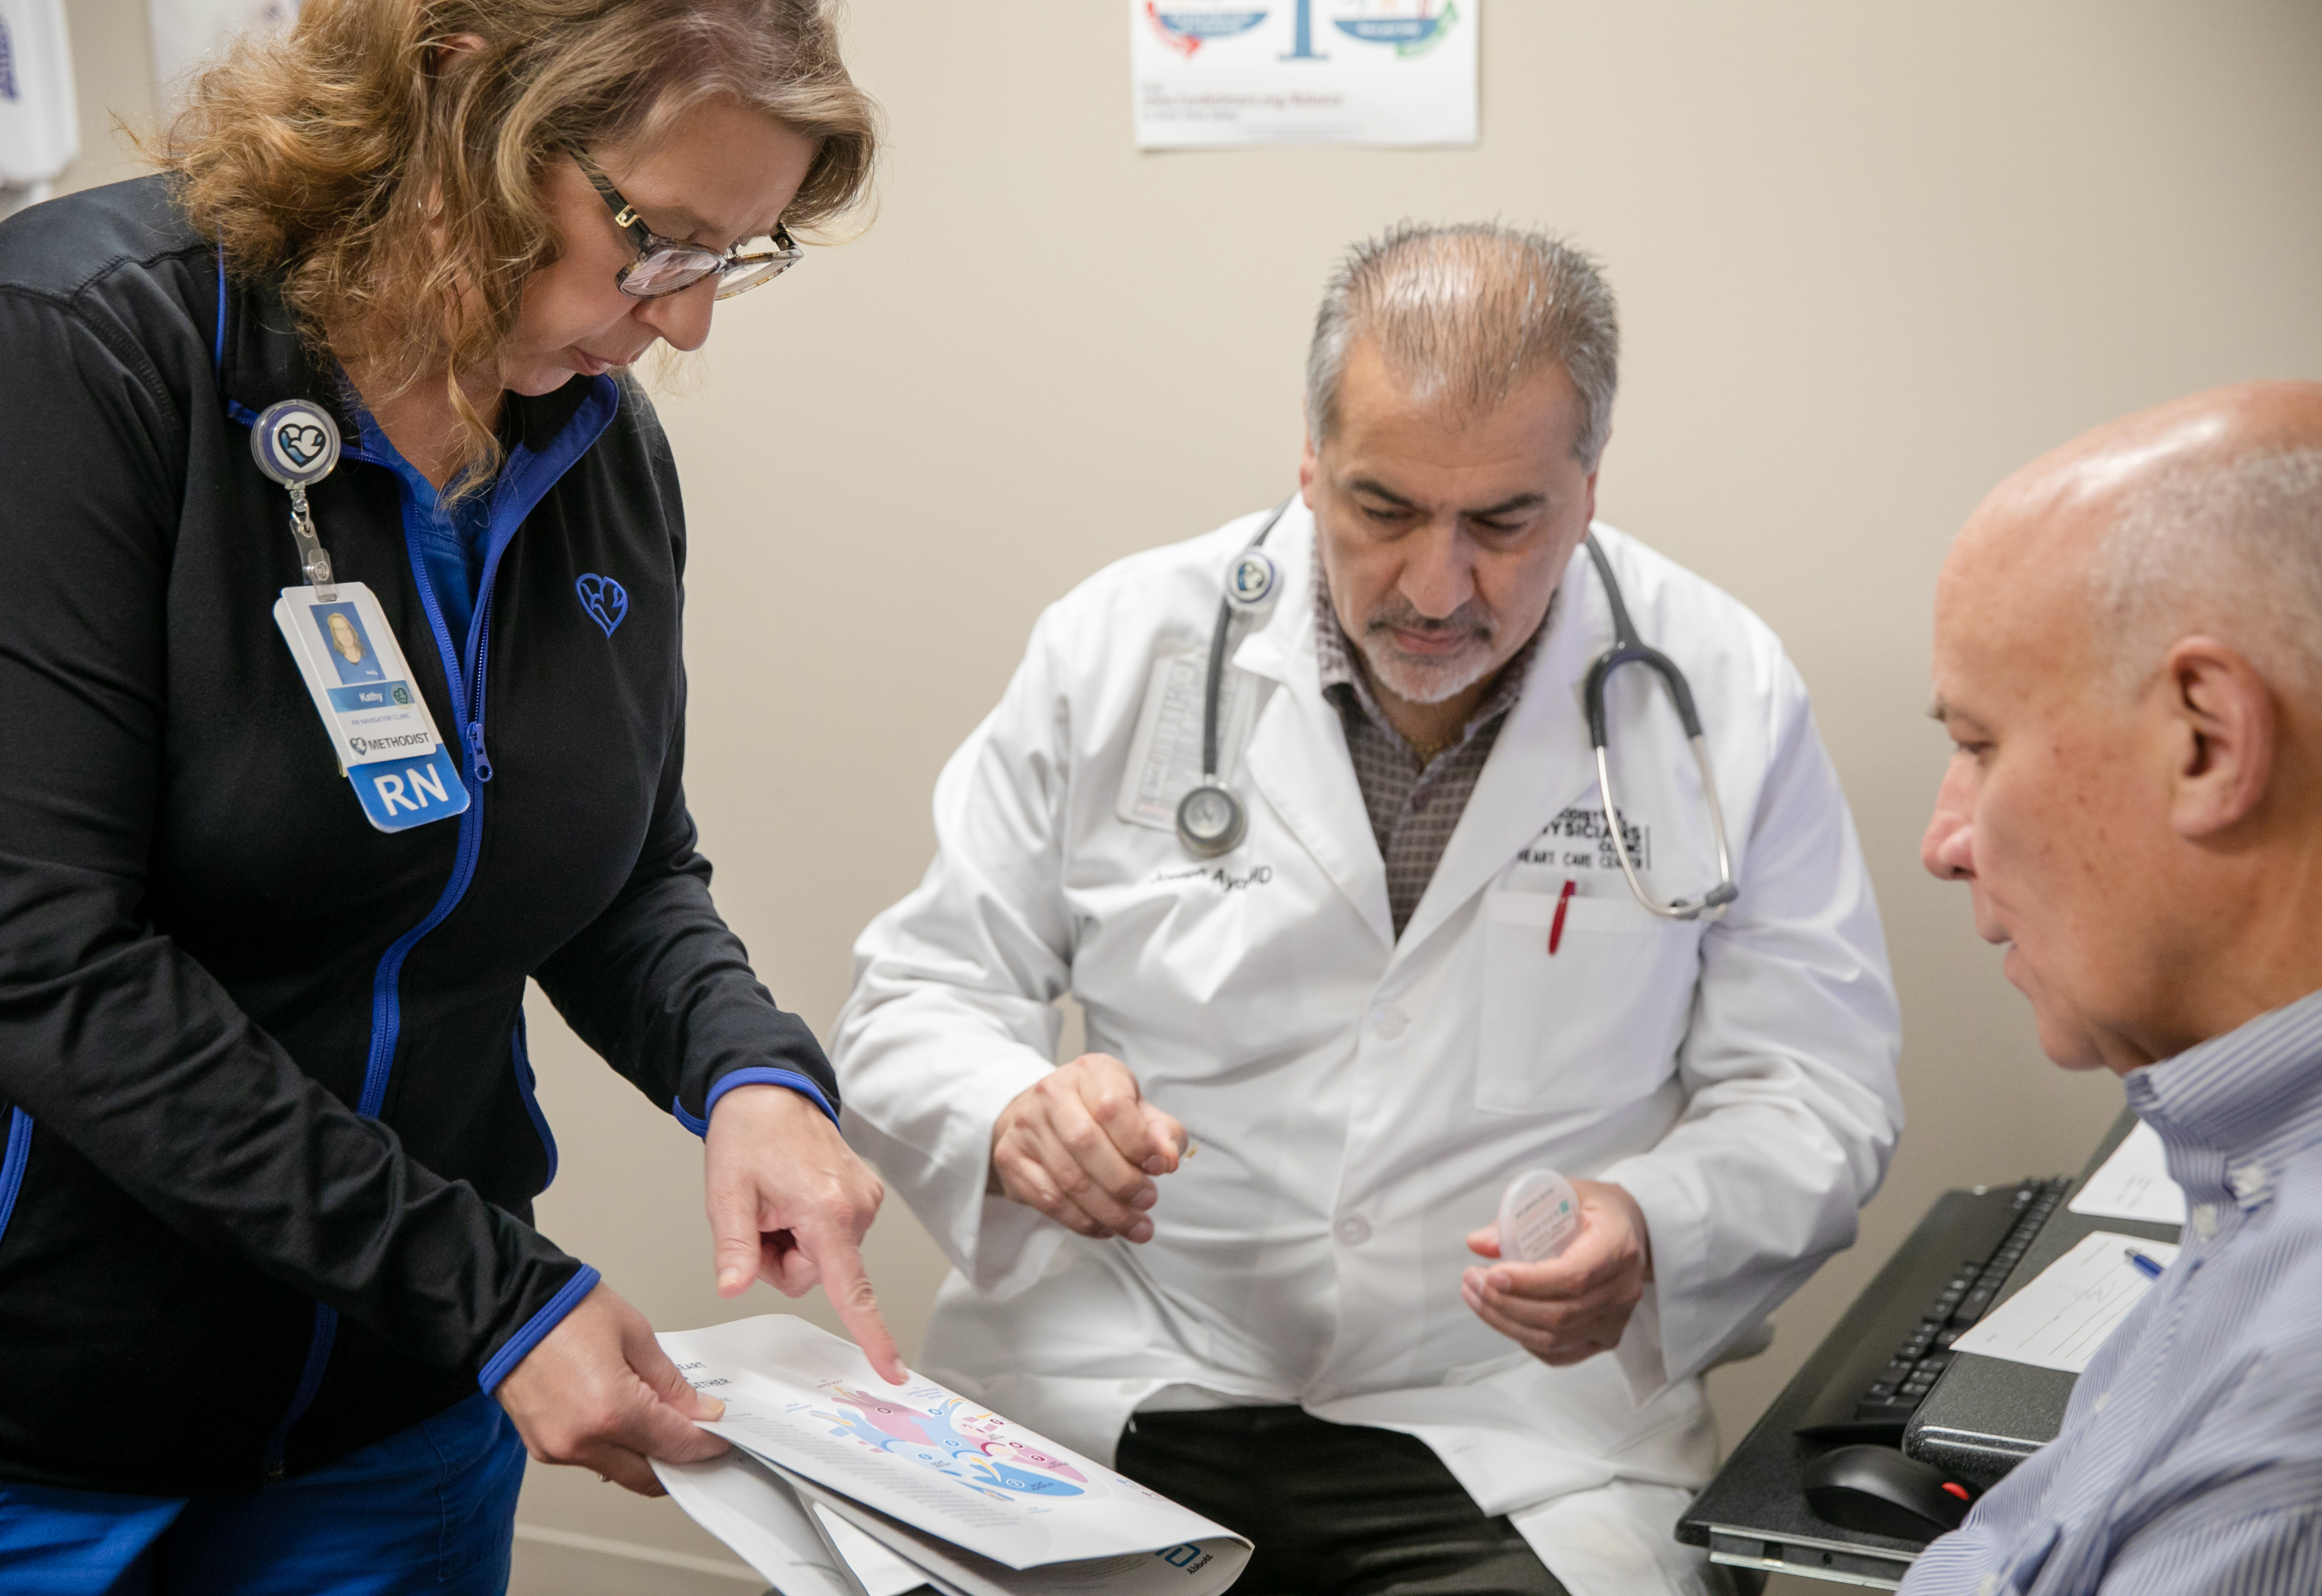 Kathy Sindelar, BSN, RN, and Joseph Ayoub, MD, meet with Tom Lowndes at a cardiology appointment 